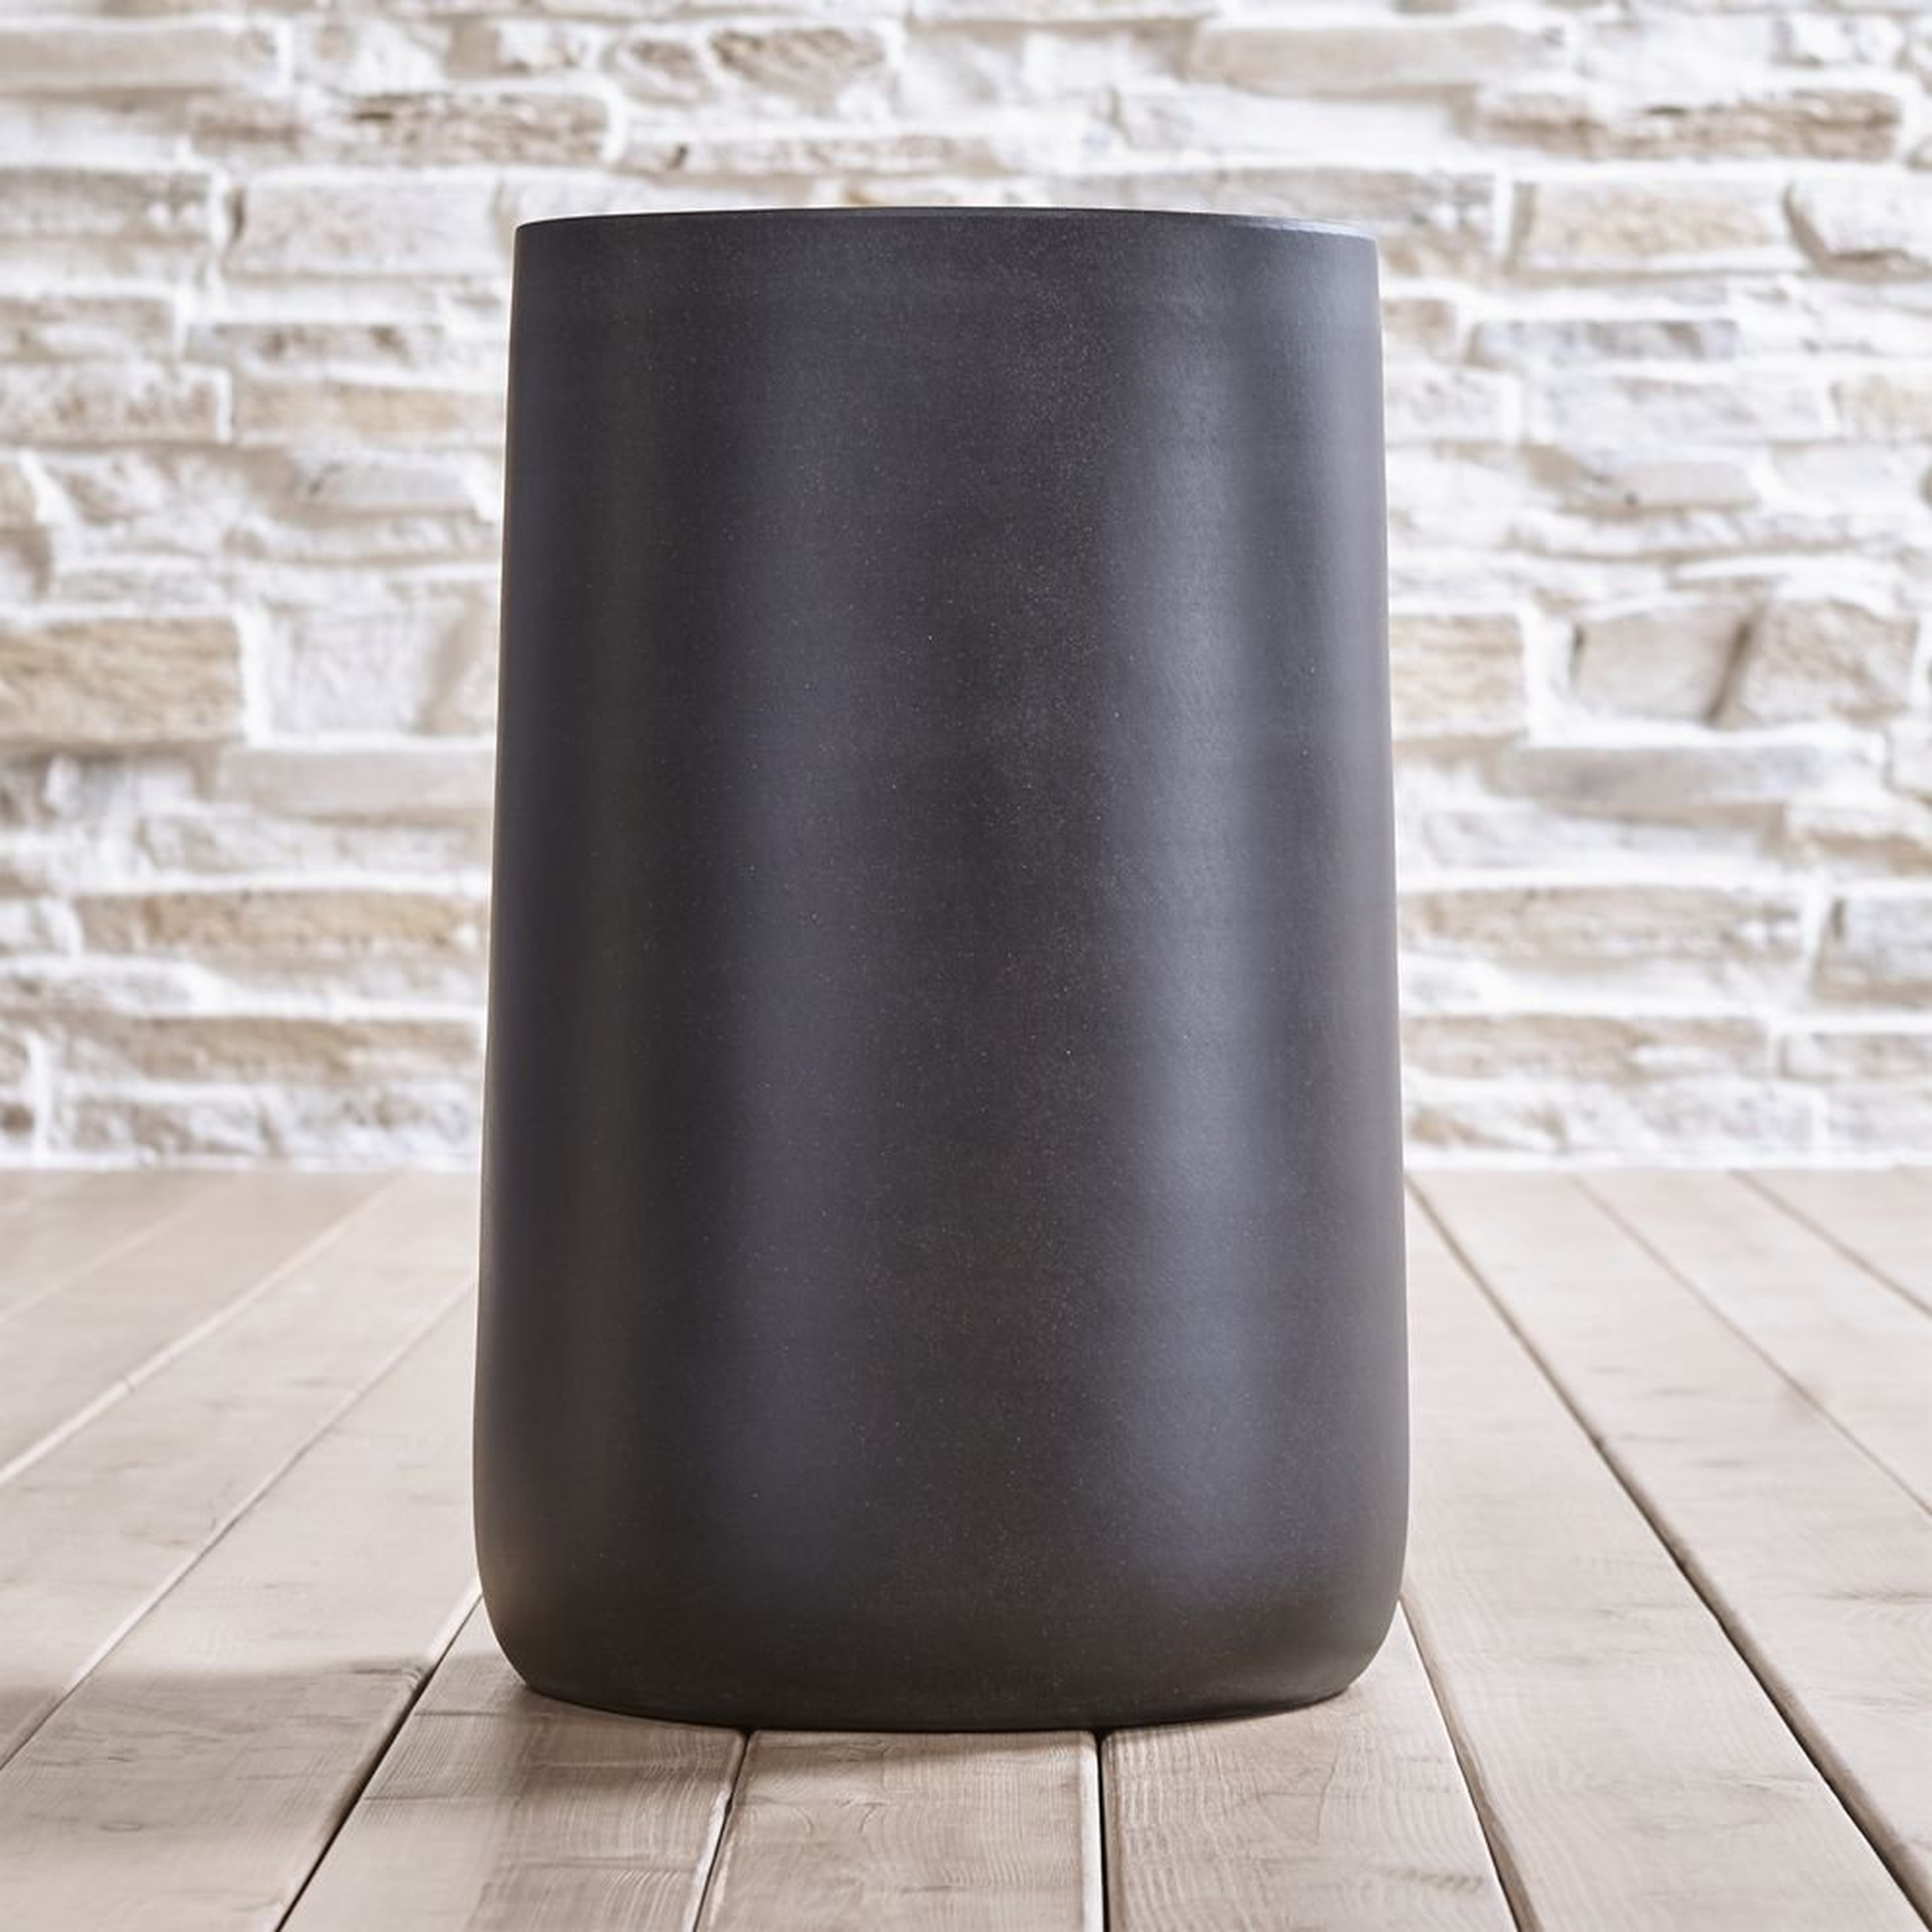 Saabira Charcoal 23.25" Tall Indoor/Outdoor Planter - Crate and Barrel